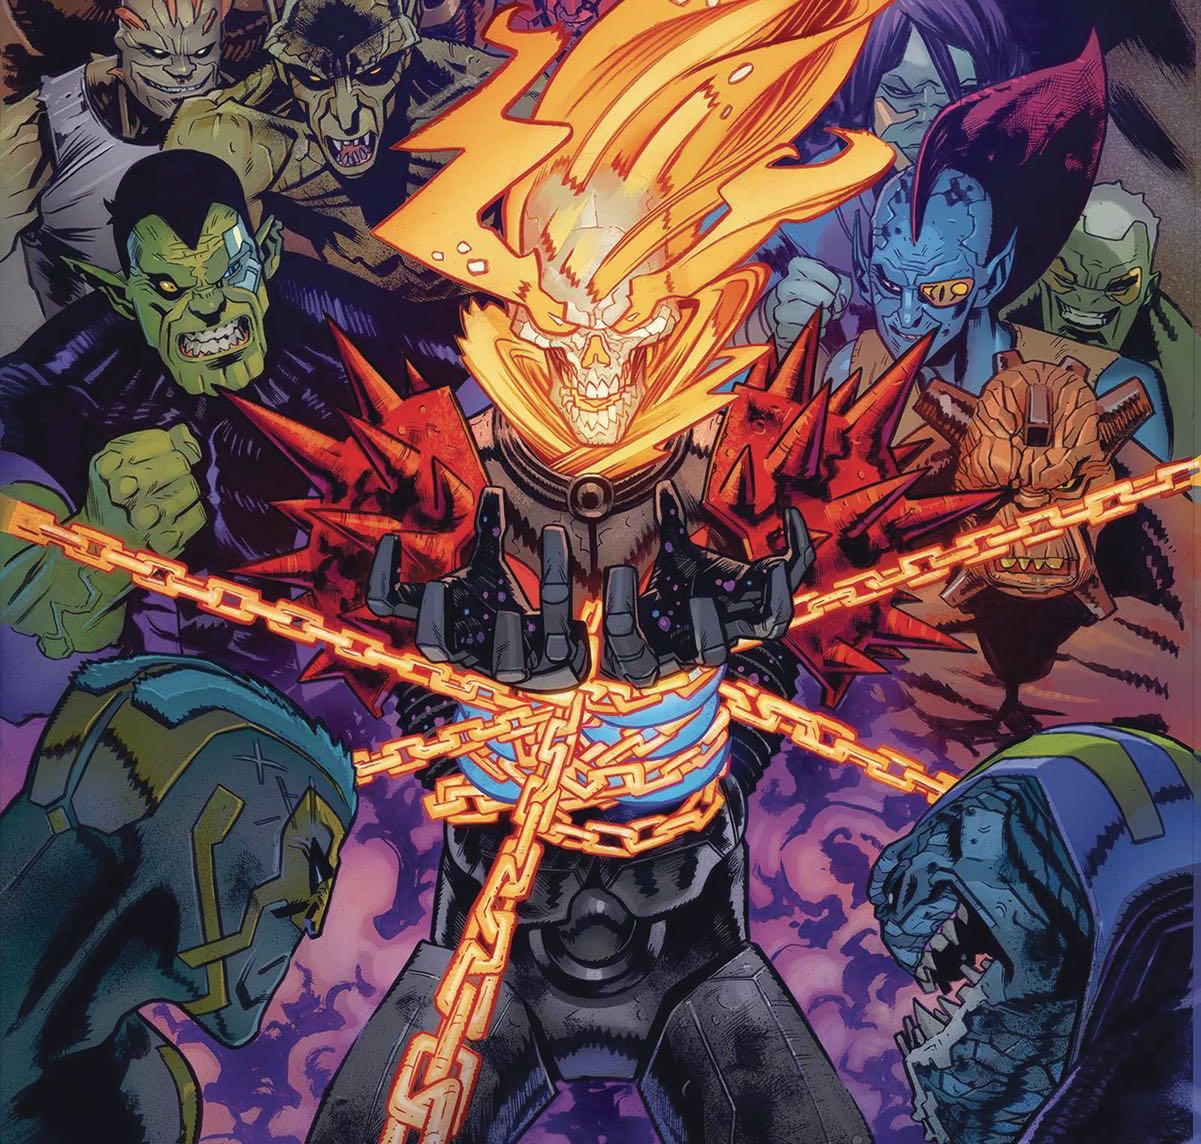 EXCLUSIVE Marvel Preview: Revenge Of The Cosmic Ghost Rider #1